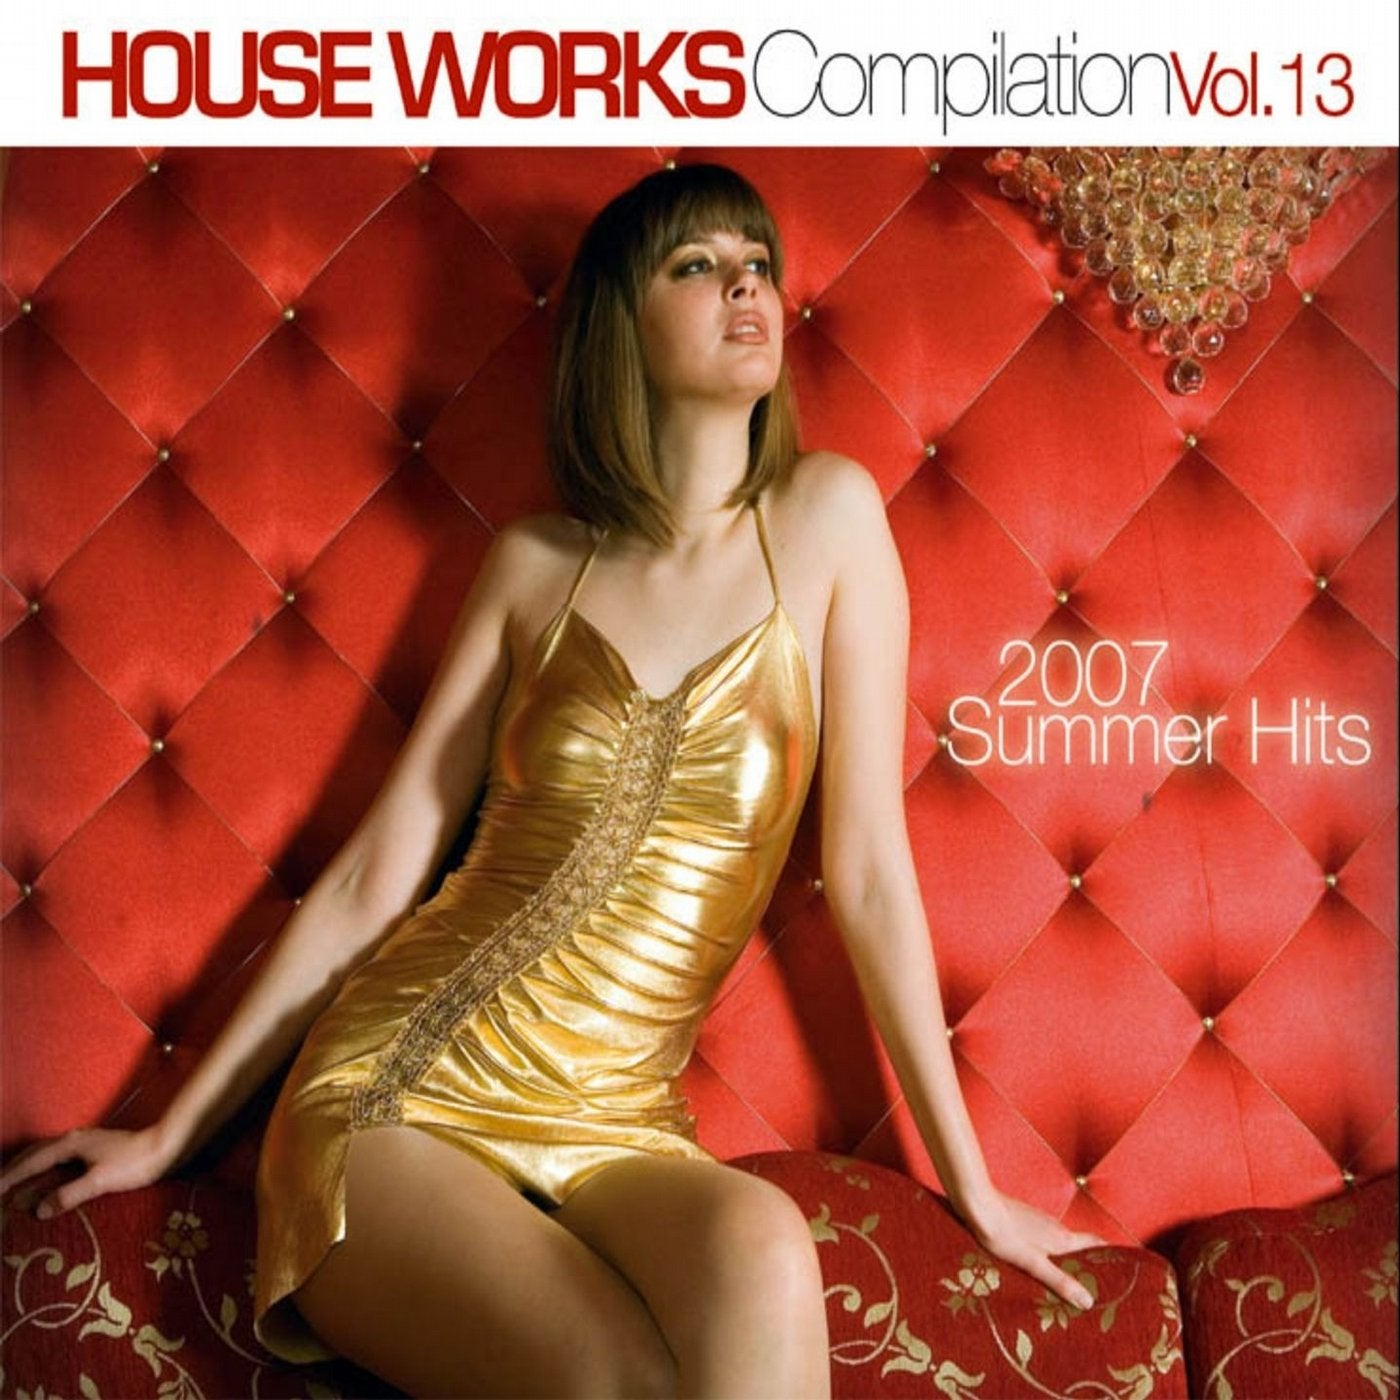 House Works Compilation, Vol.13 (2007 Summer Hits)